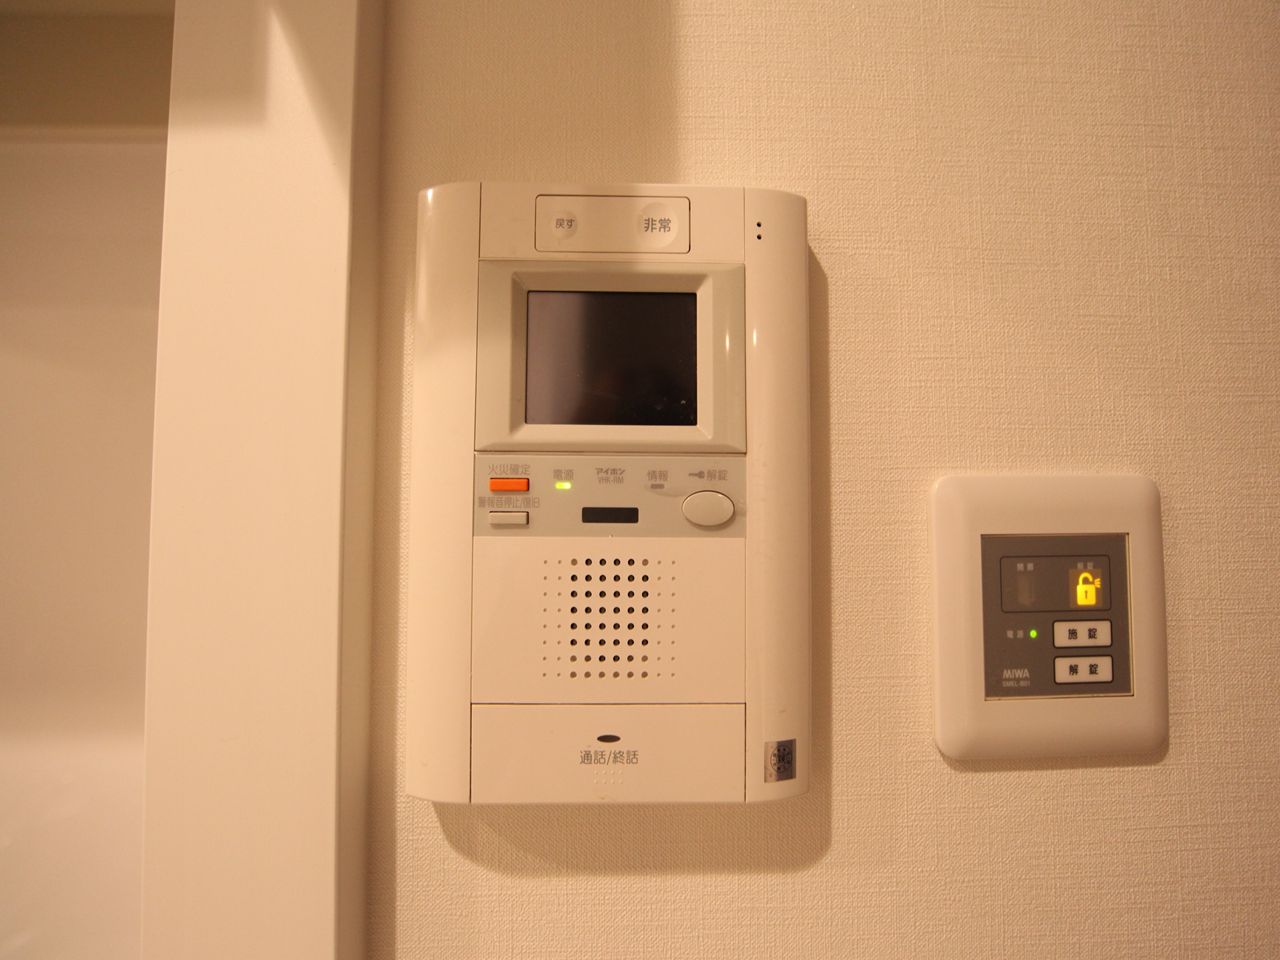 Security. TV monitor Hong auto lock ・ Rooms can also be unlocked